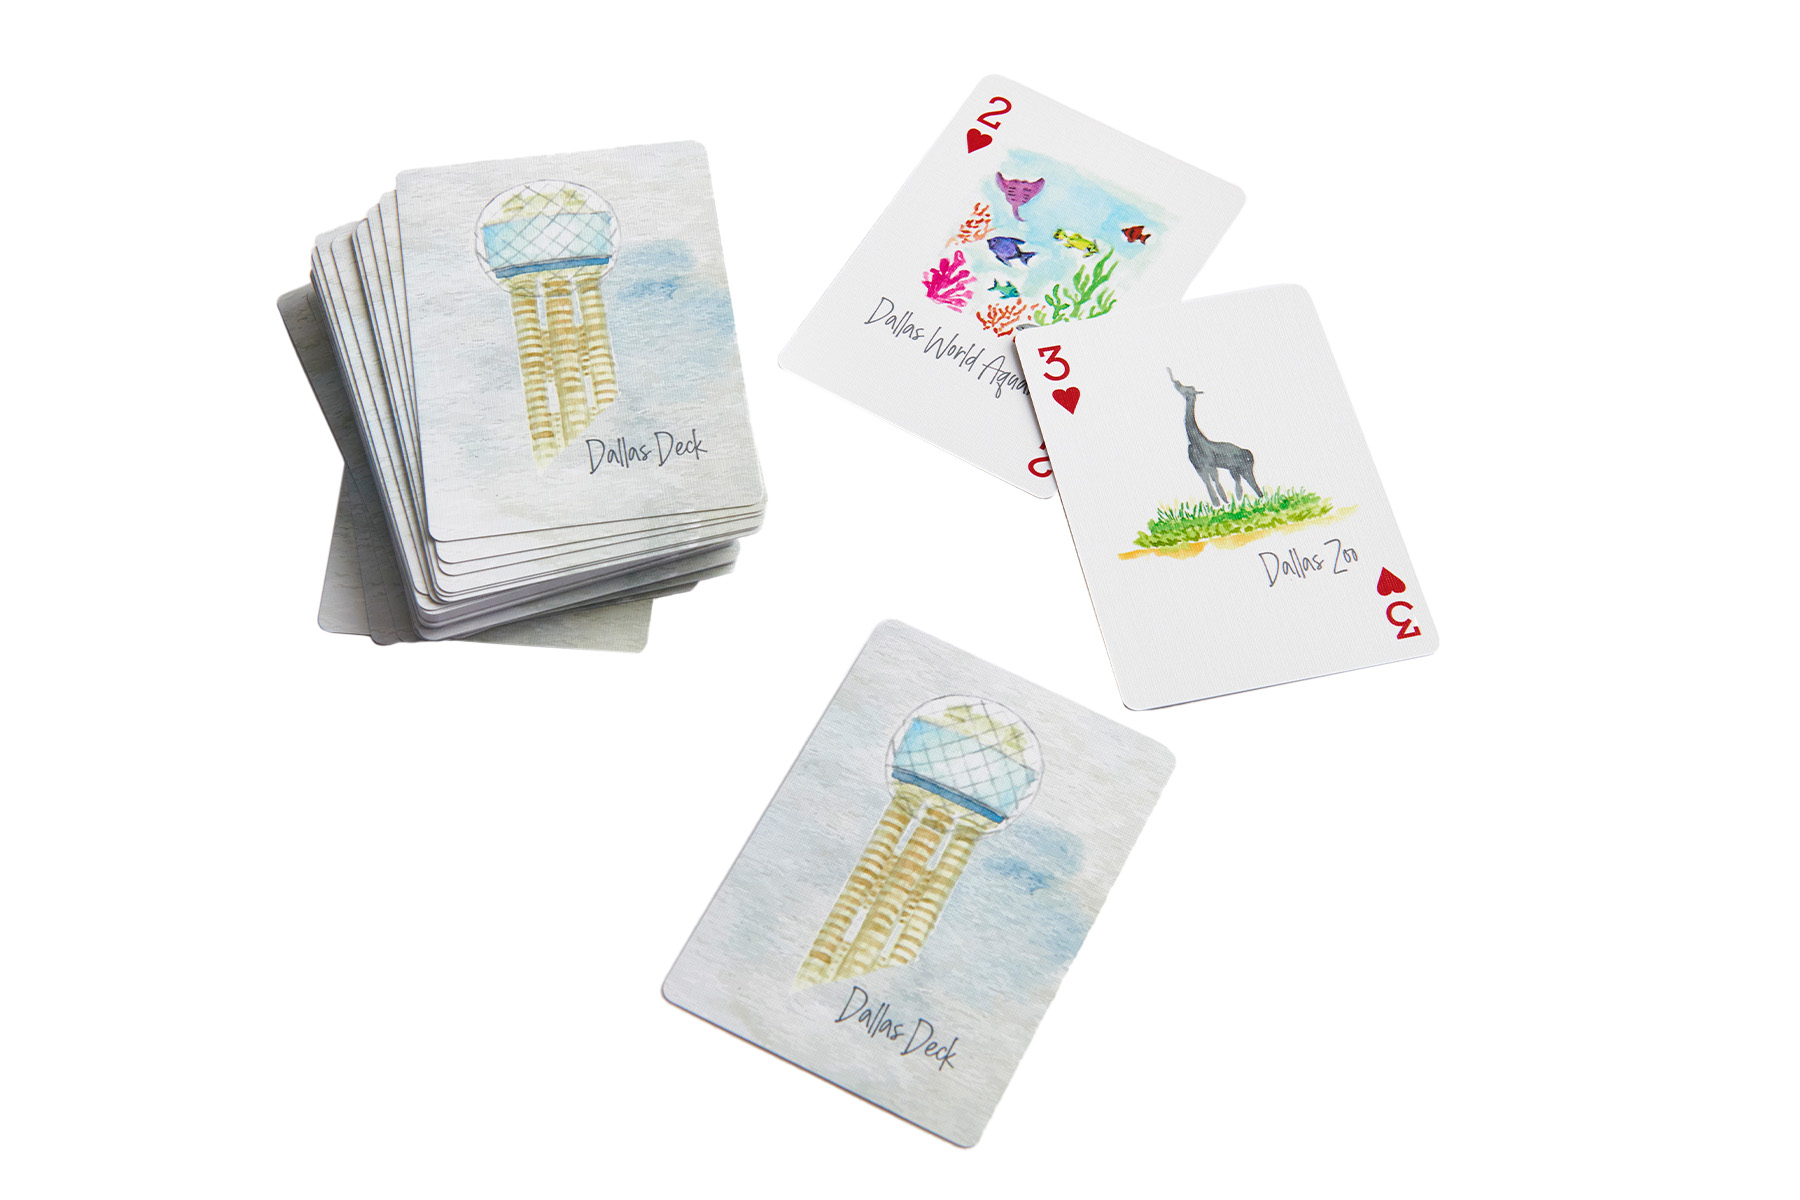 Dallas Playing Cards from All Good Things